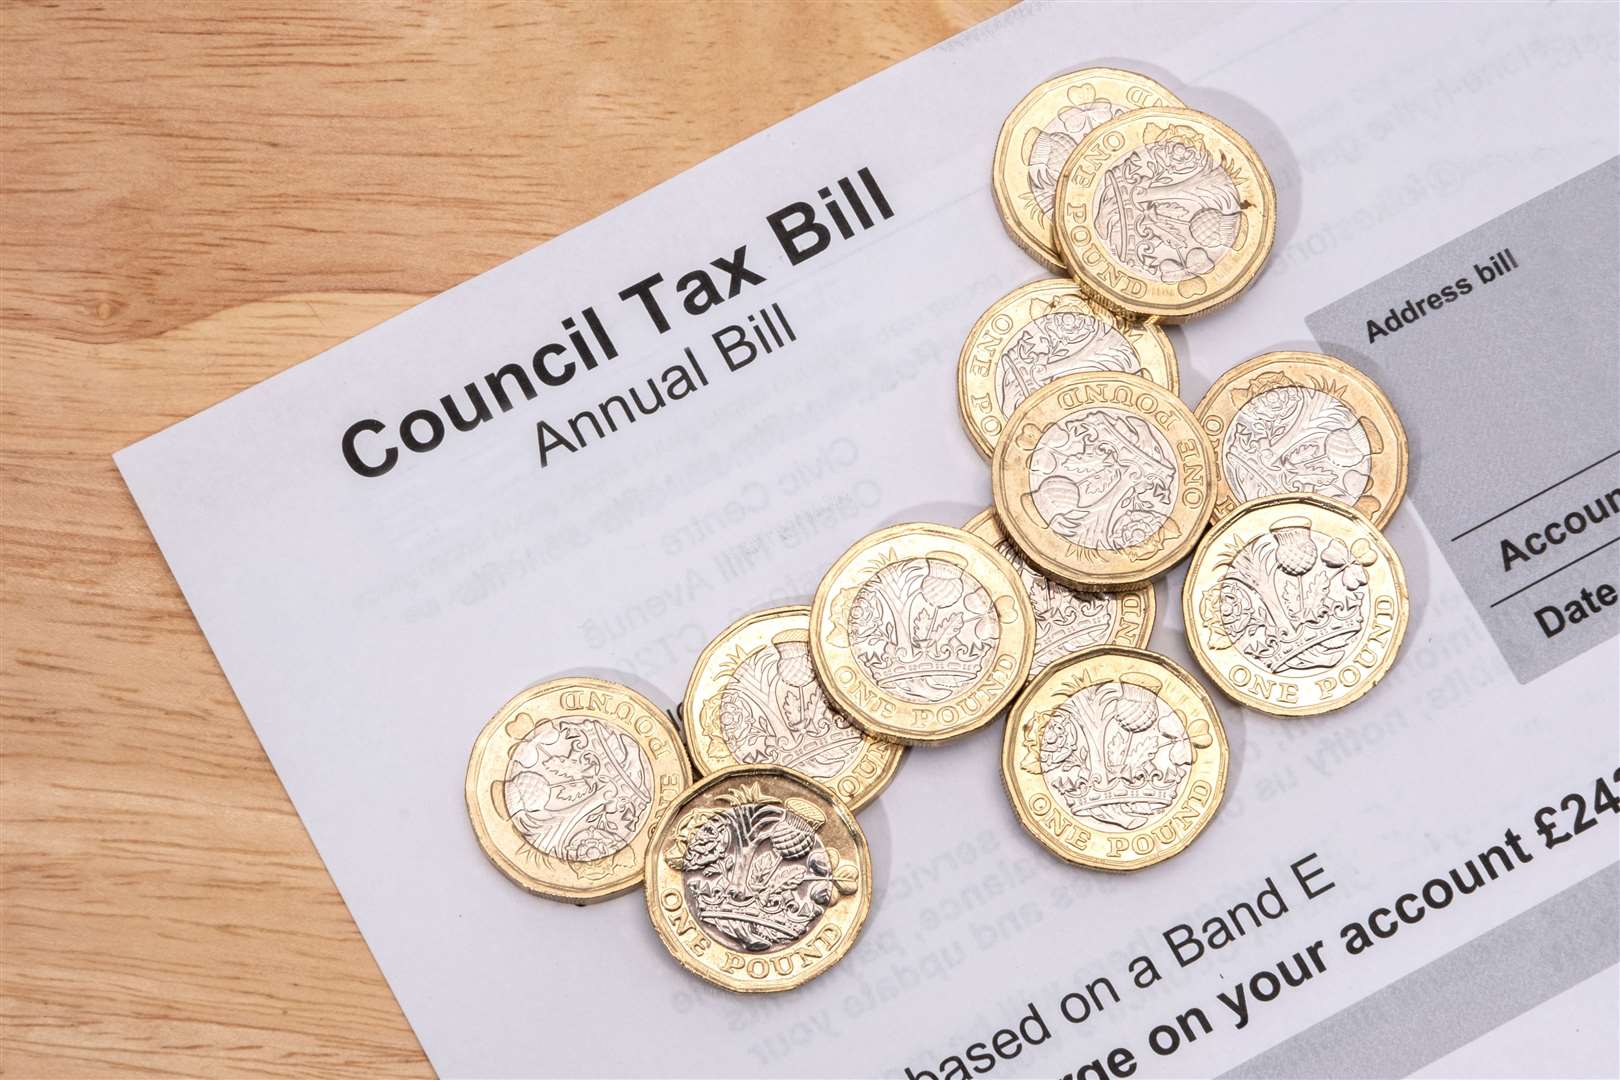 Council tax is set to rise